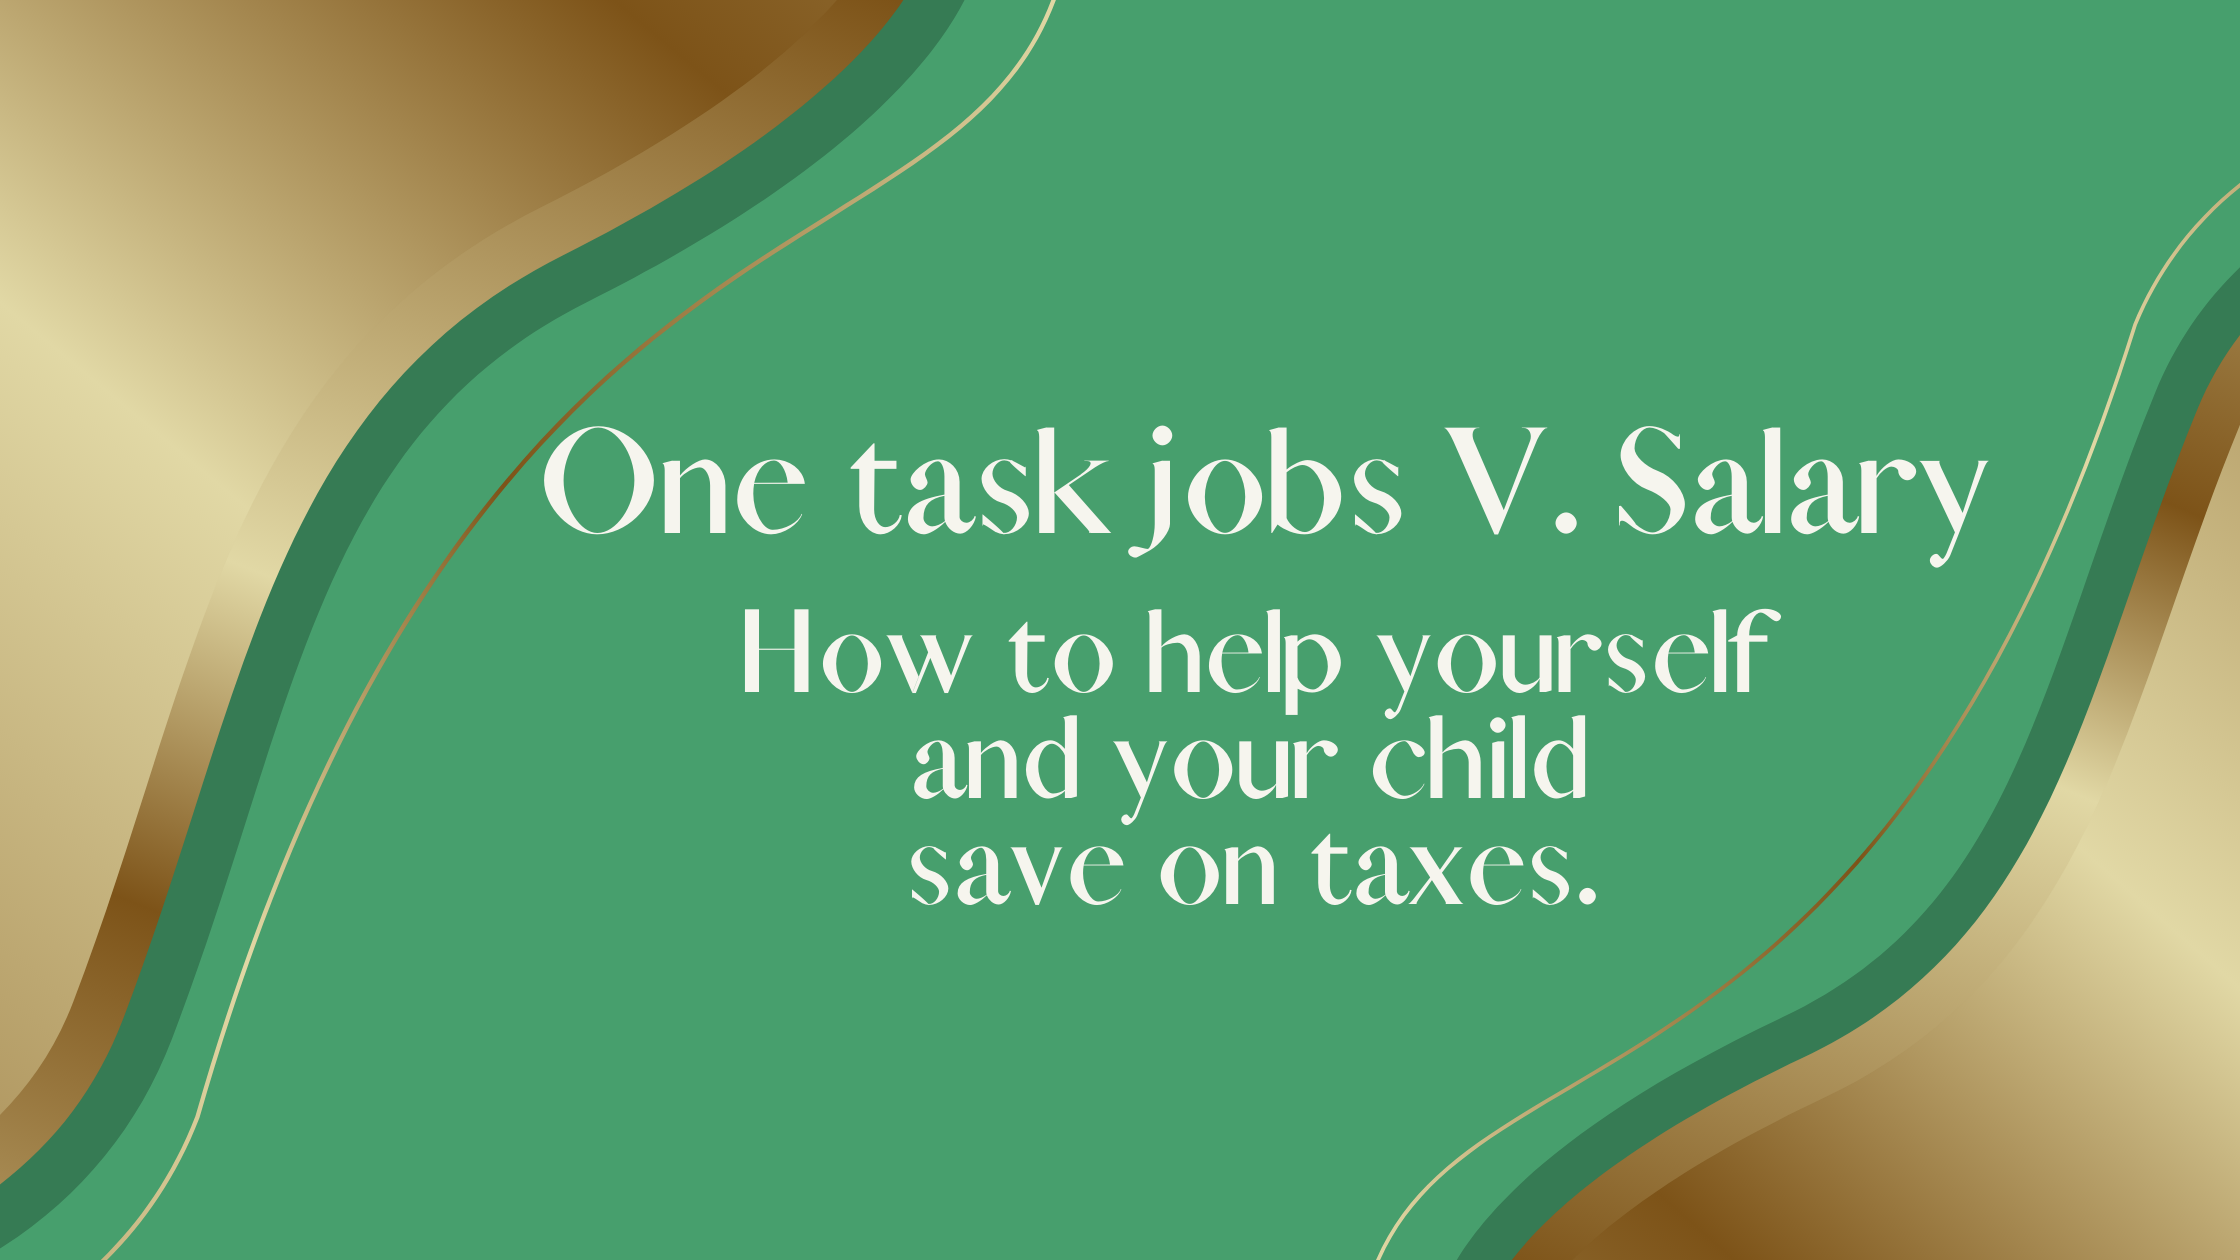 One task jobs verses Salary. How to help yourself and your child save on taxes.